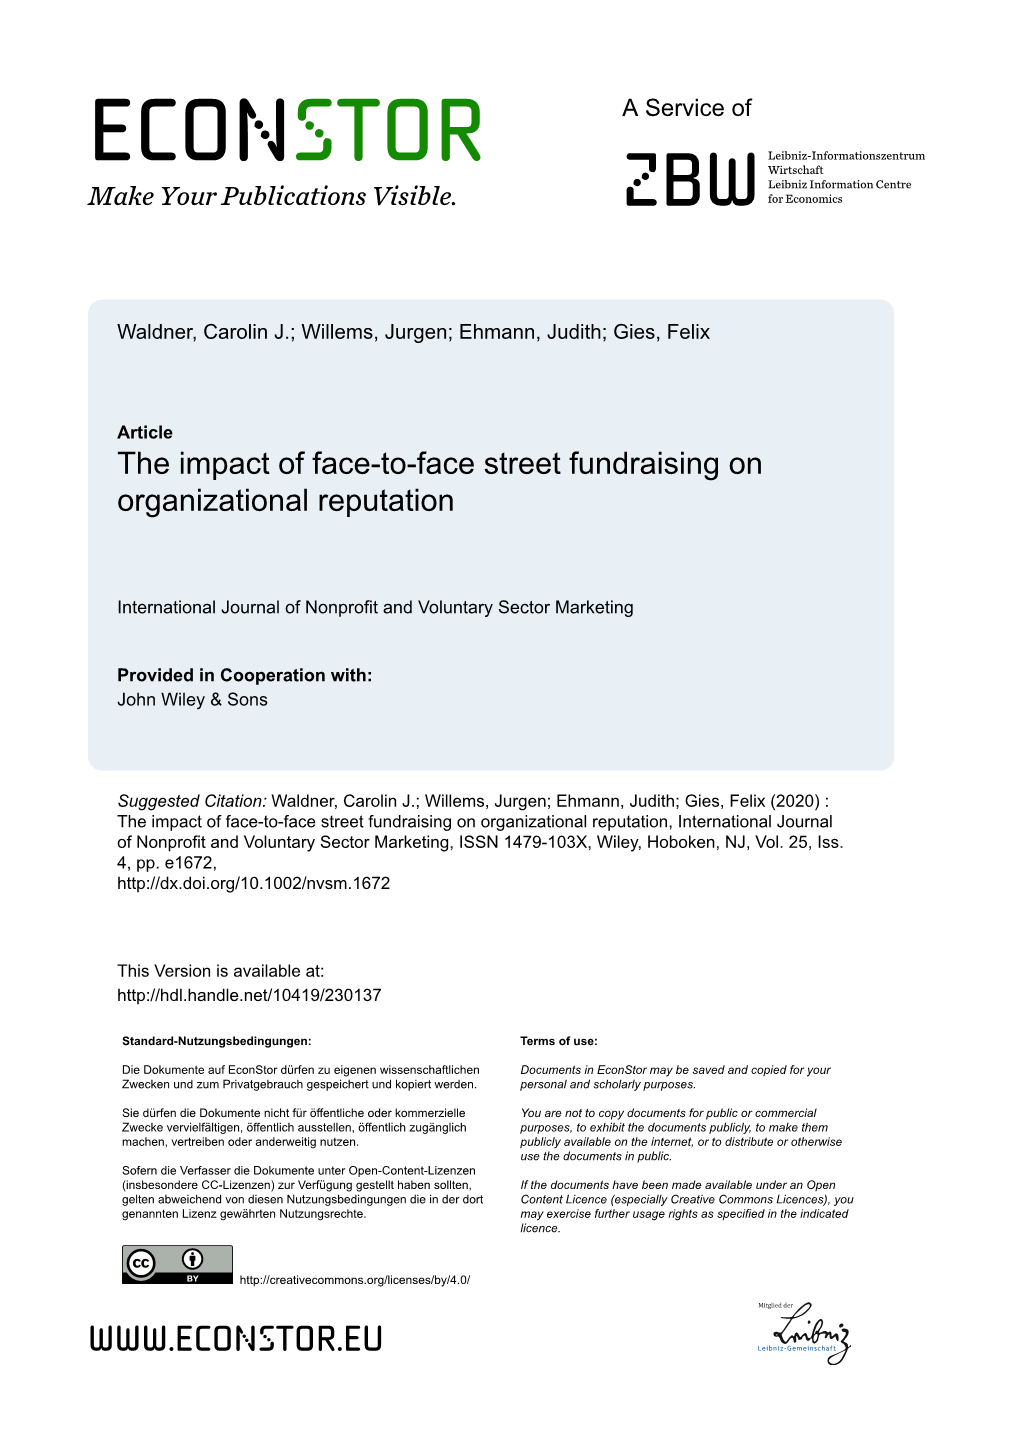 The Impact of Face‐To‐Face Street Fundraising on Organizational Reputation